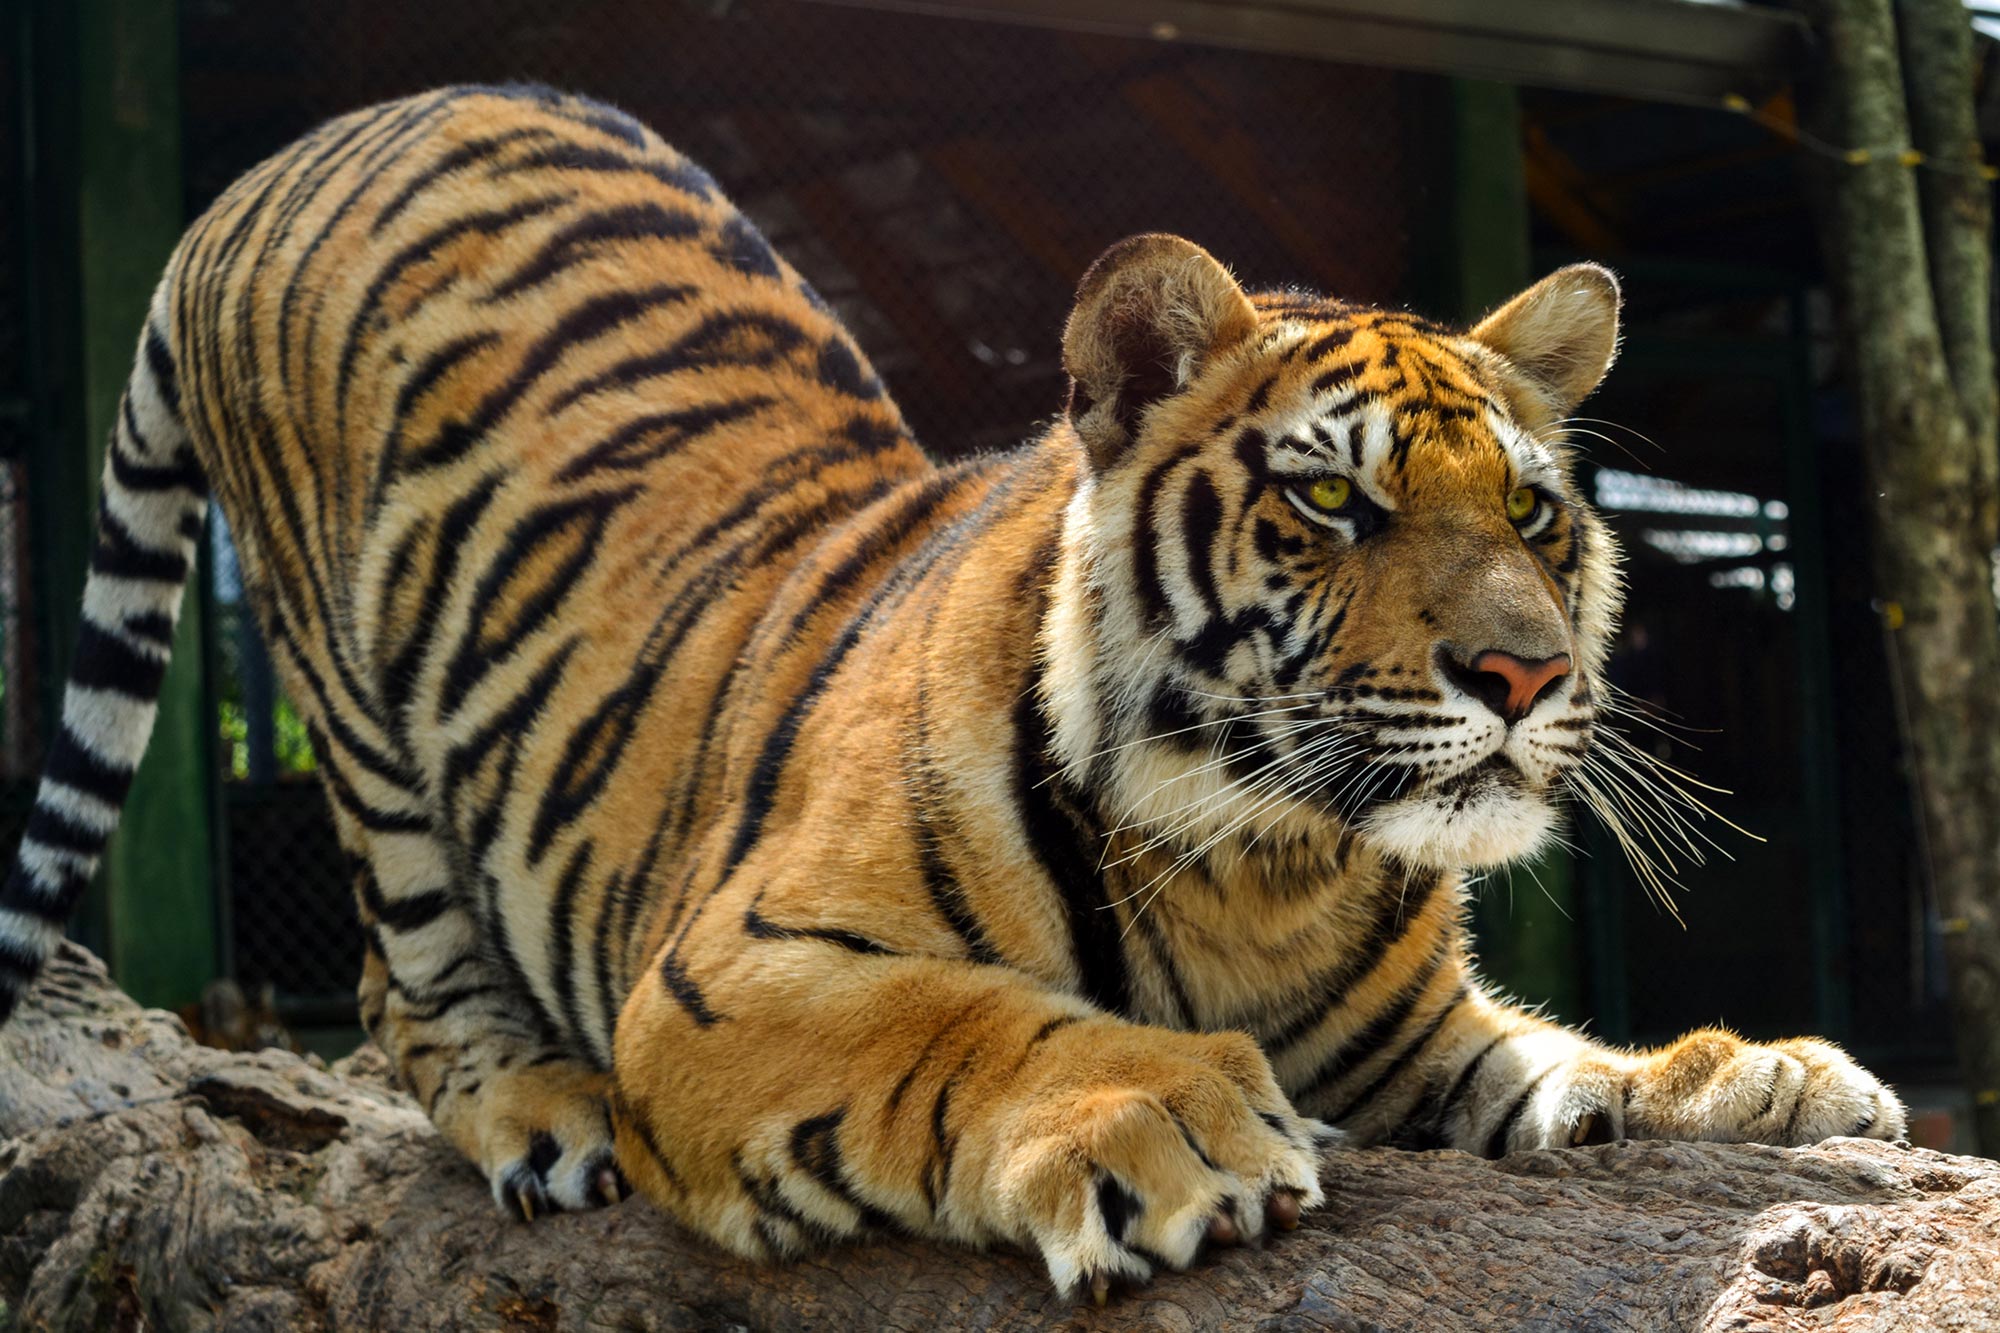 big-paws-bigger-problems-why-you-shouldn-t-declaw-tigers-or-other-big-cats